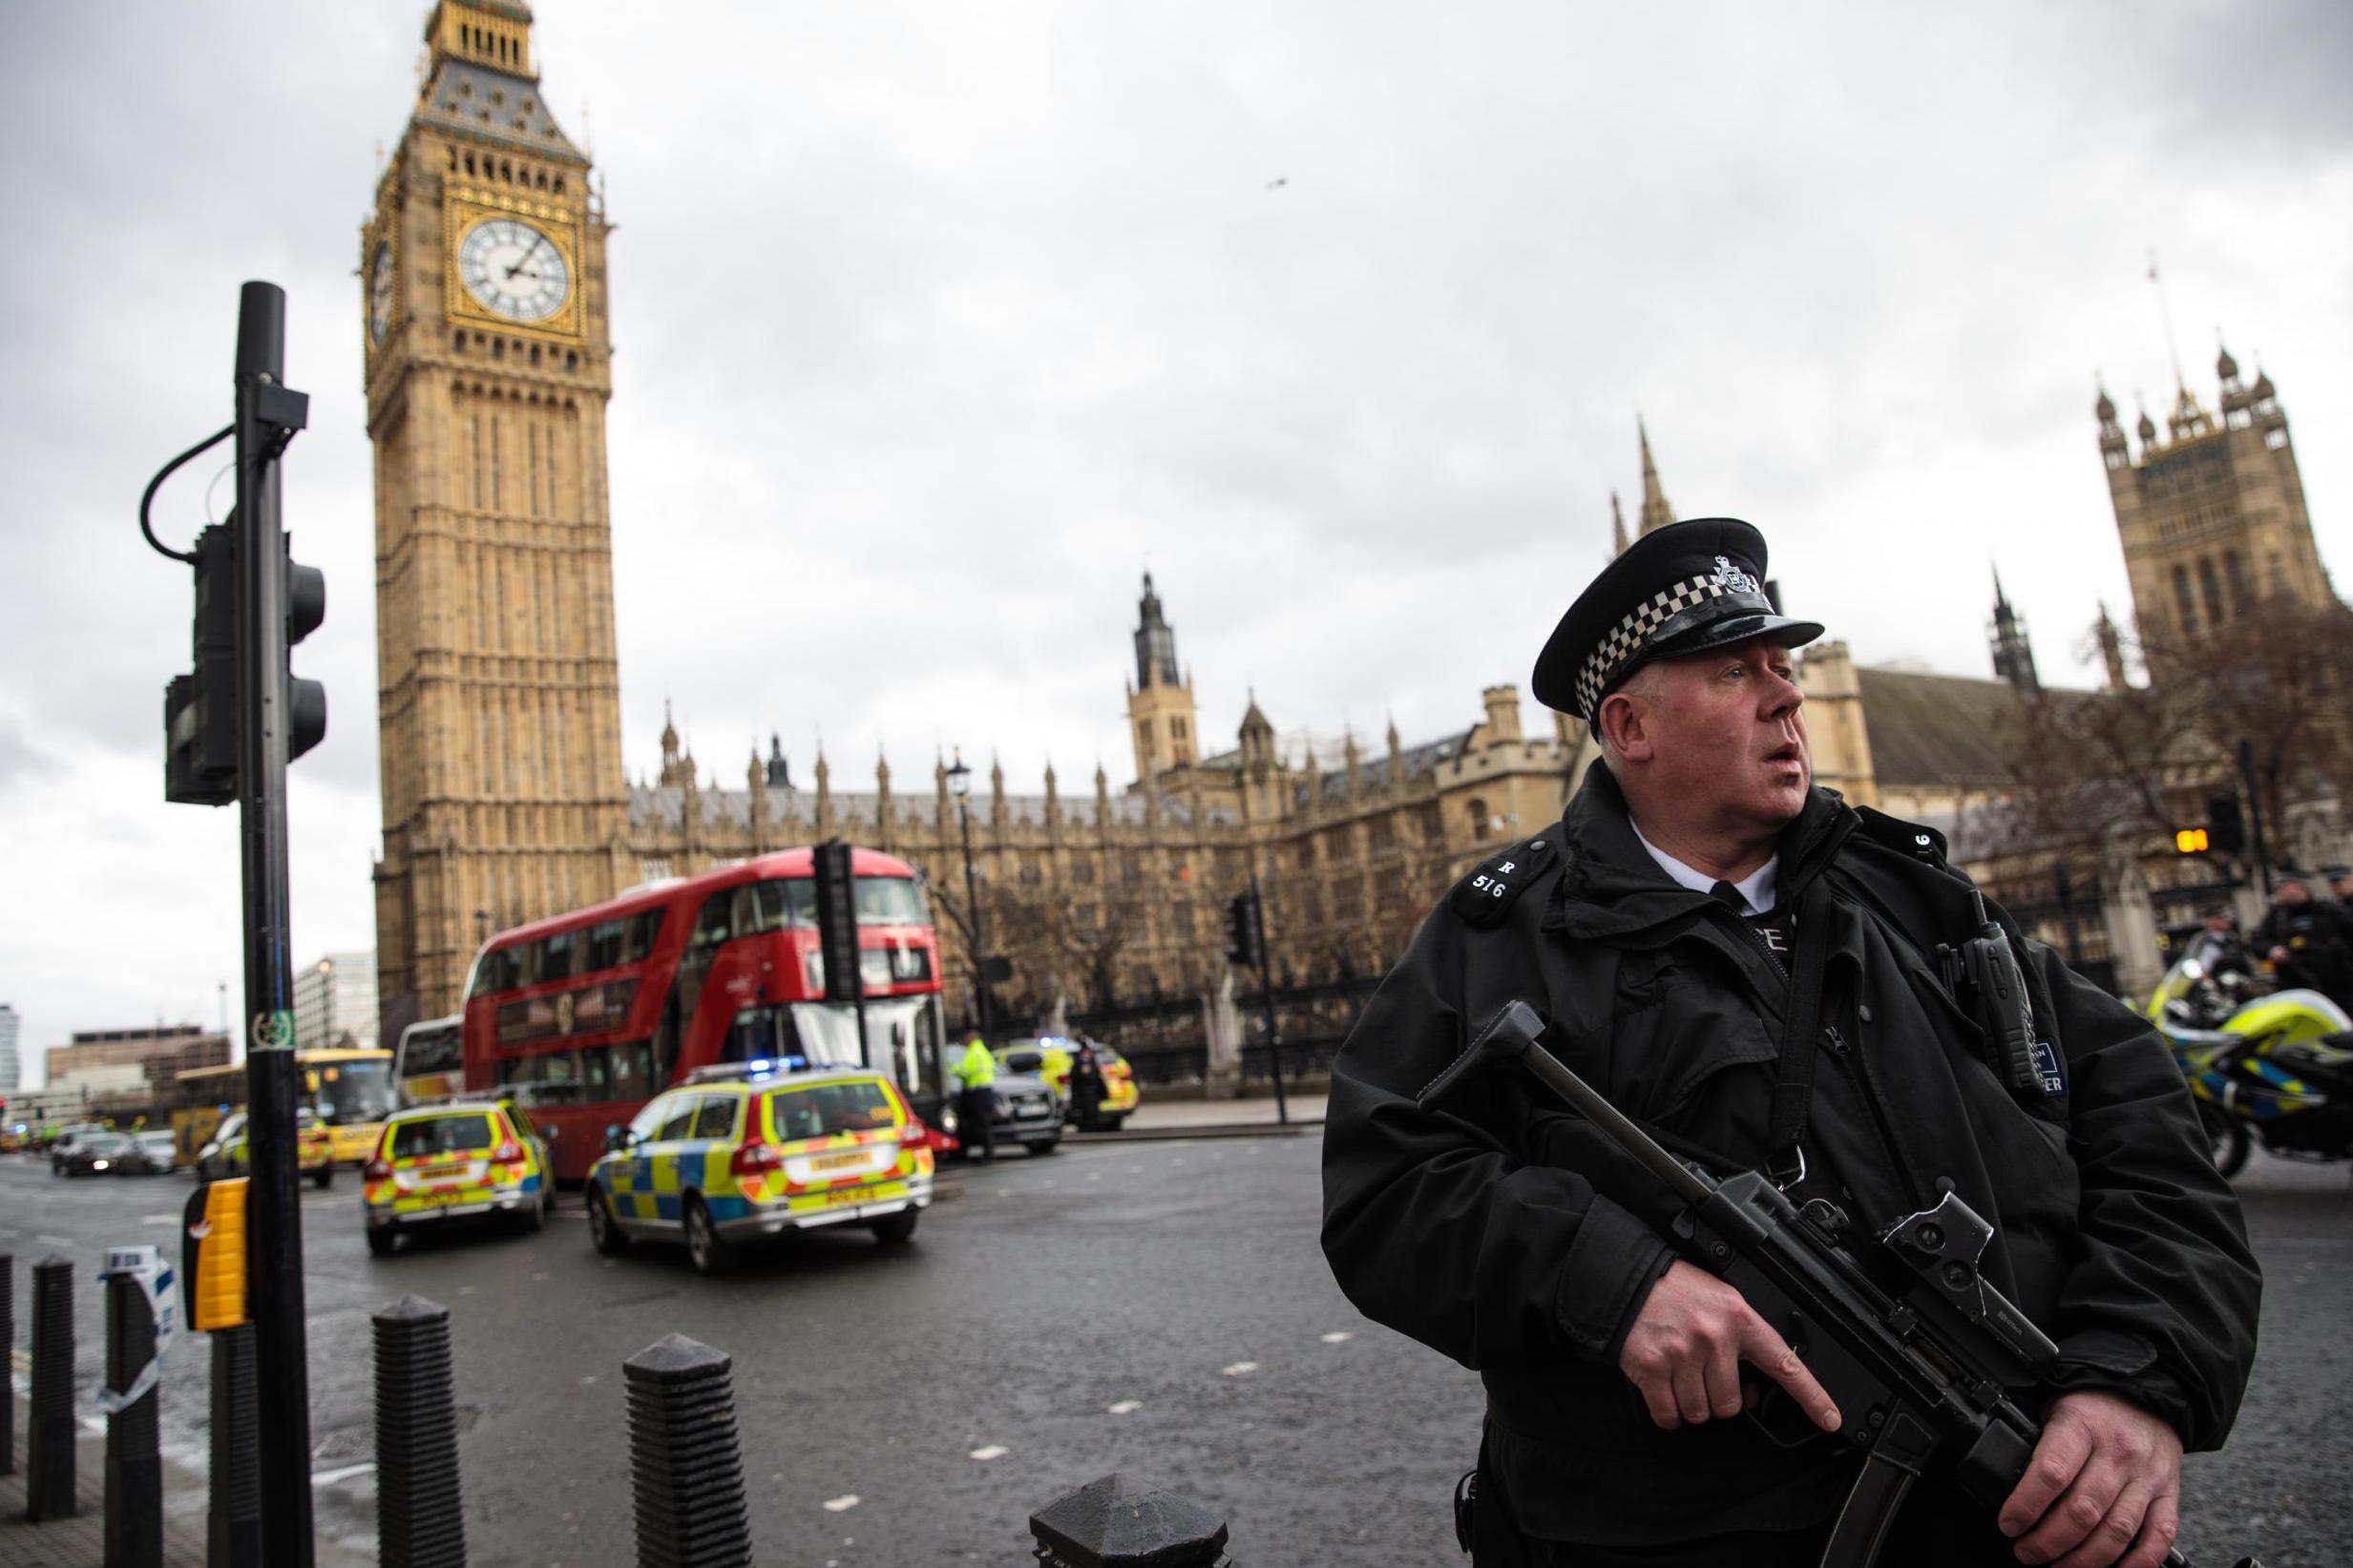 An armed police officer stands guard opposite the tourist attraction of Big Ben